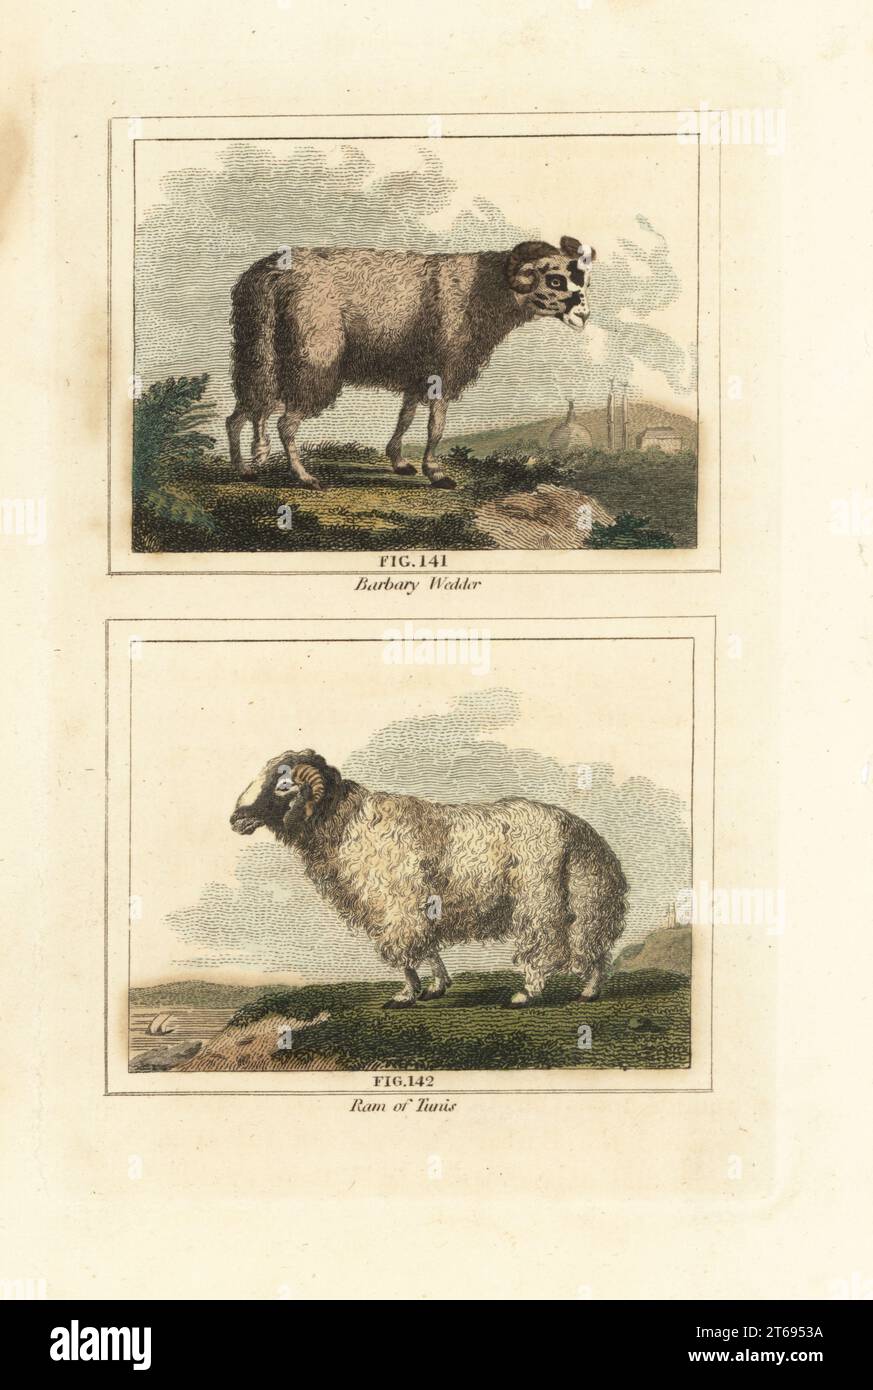 Broad tailed sheep, Ovis aries subsp. laticaudata 141, 142, known as Barbary wedder, and Tunis sheep. Handcoloured copperplate engraving after Jacques de Seve from James Smith Barrs edition of Comte Buffons Natural History, A Theory of the Earth, General History of Man, Brute Creation, Vegetables, Minerals, T. Gillet, H. D. Symonds, Paternoster Row, London, 1807. Stock Photo